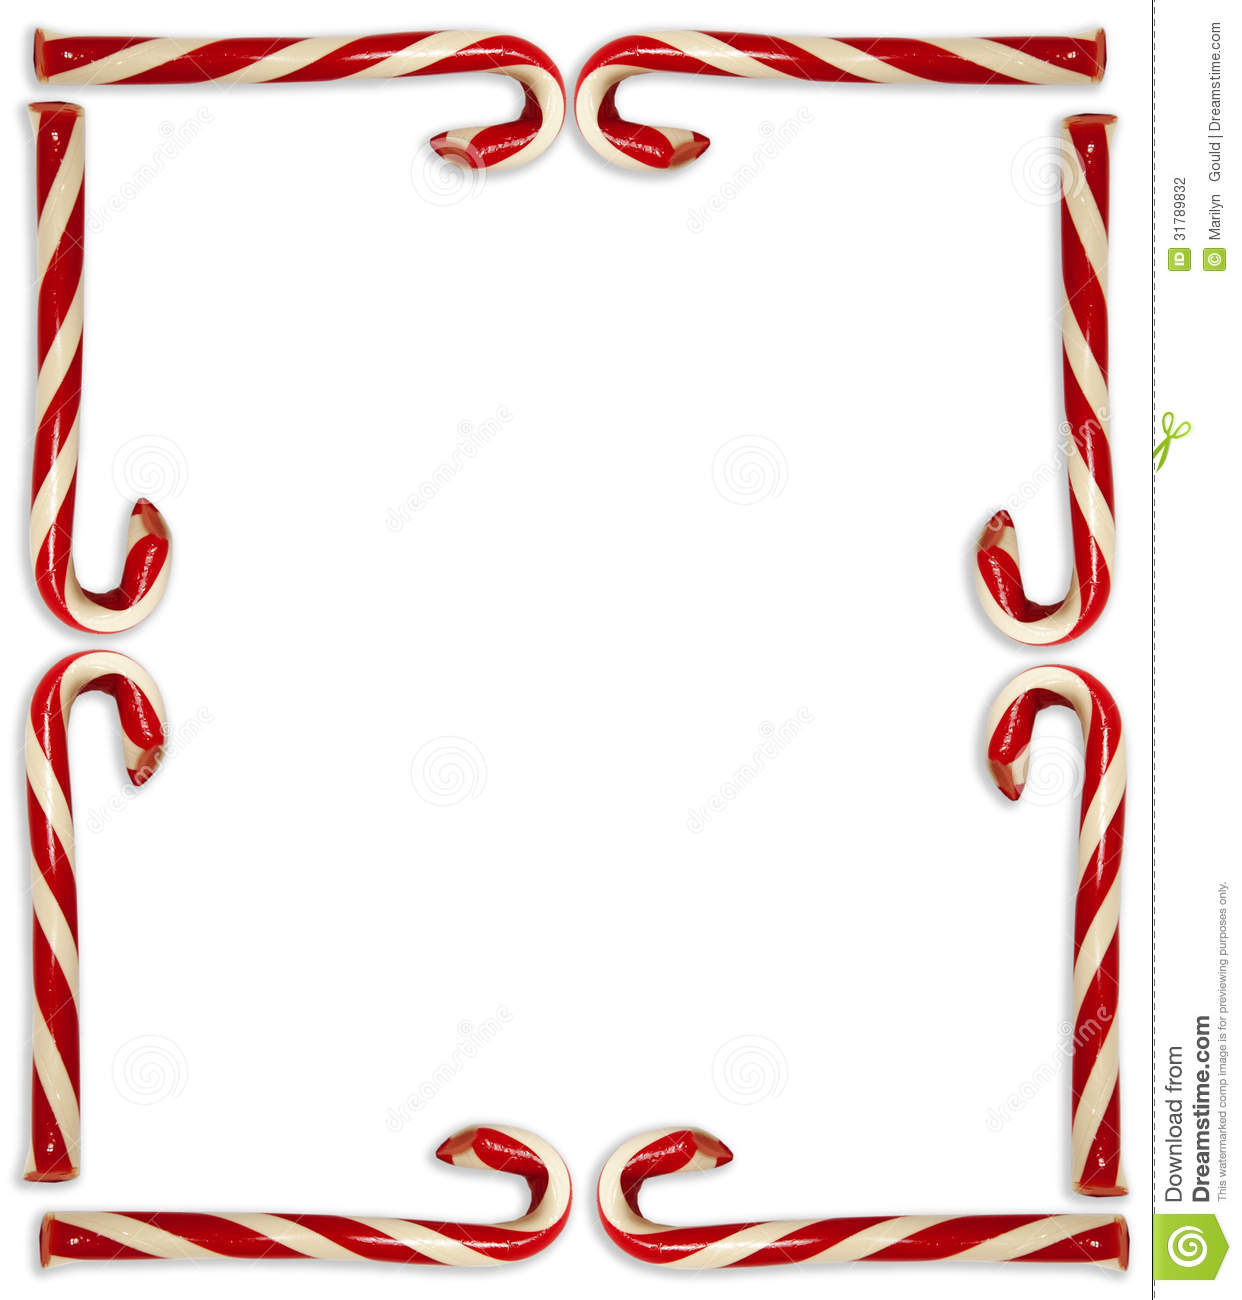 Free Candy Cane Border Clipart Free download on ClipArtMag